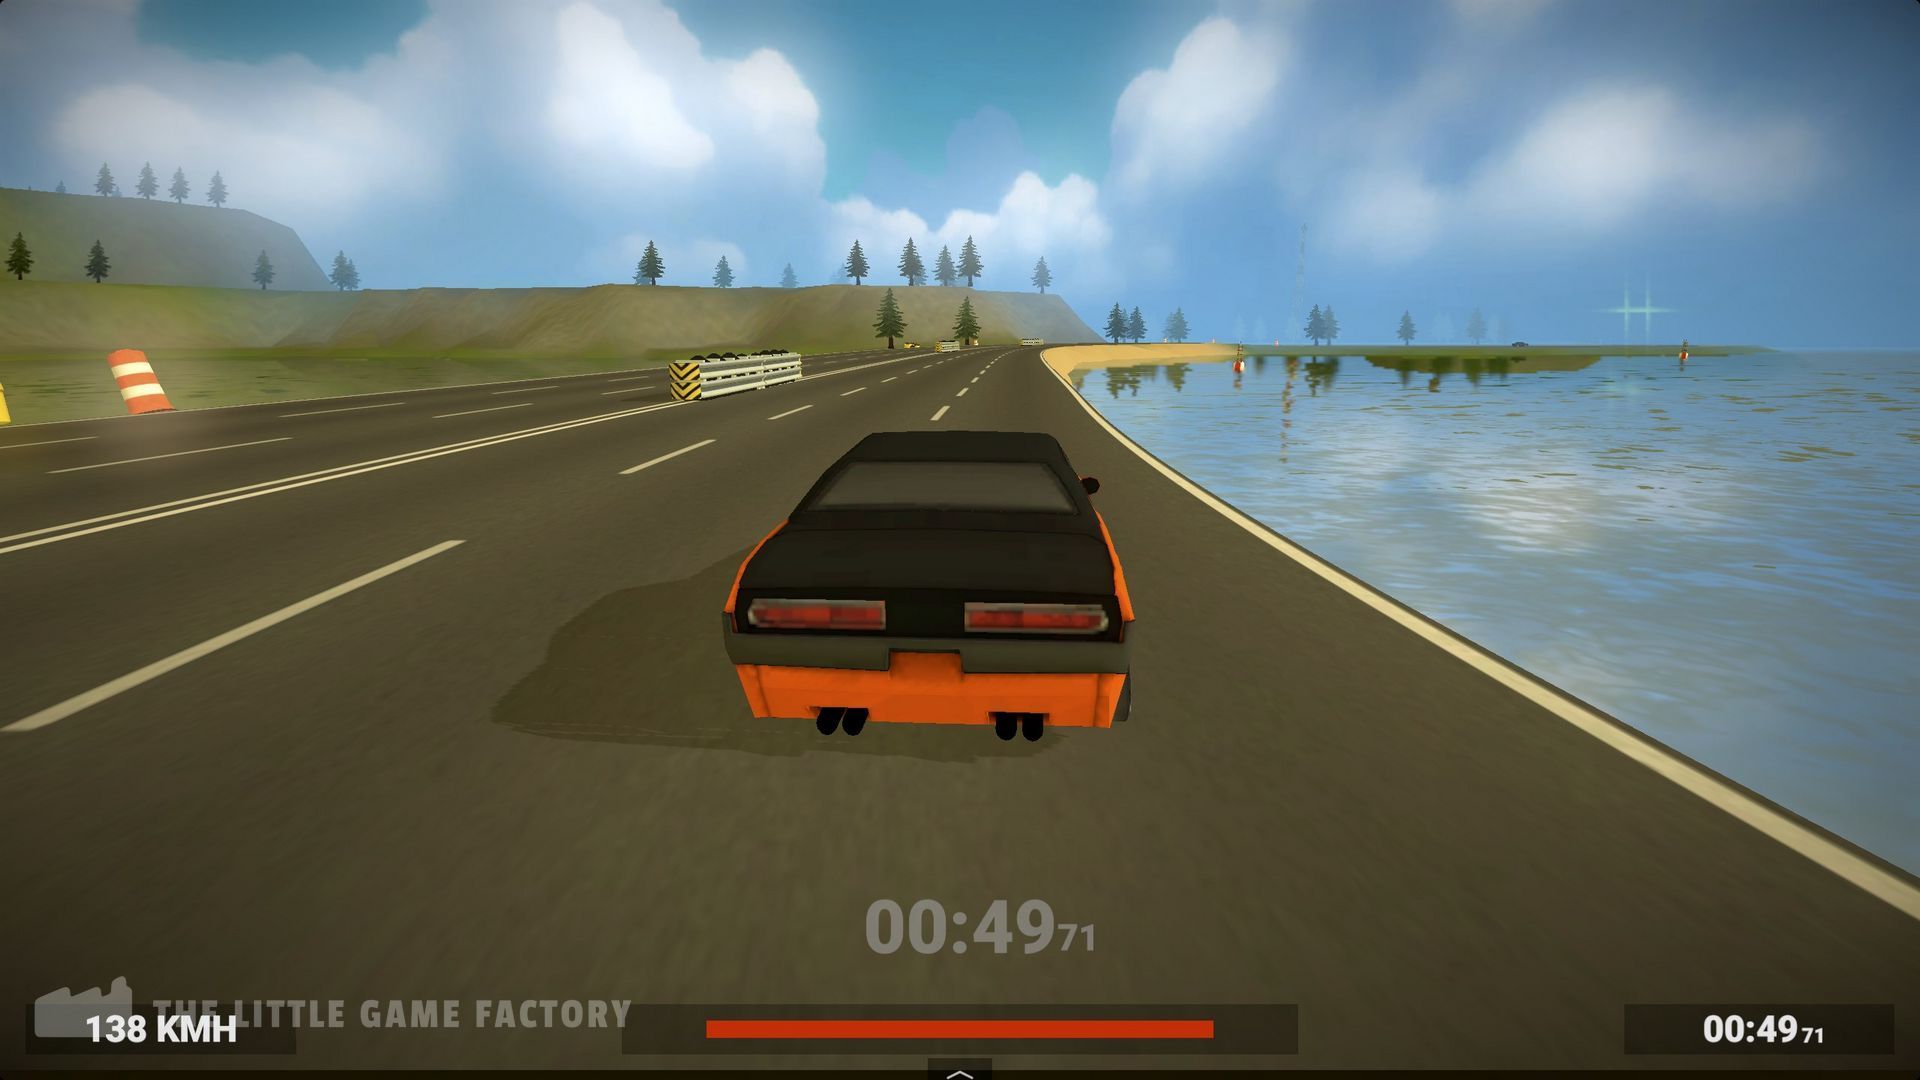 One Track Challenge Ingame Screenshot 2 | Unity WebGL game | Play WebGL games on thelittlegamefactory.com and supergoodgames.com